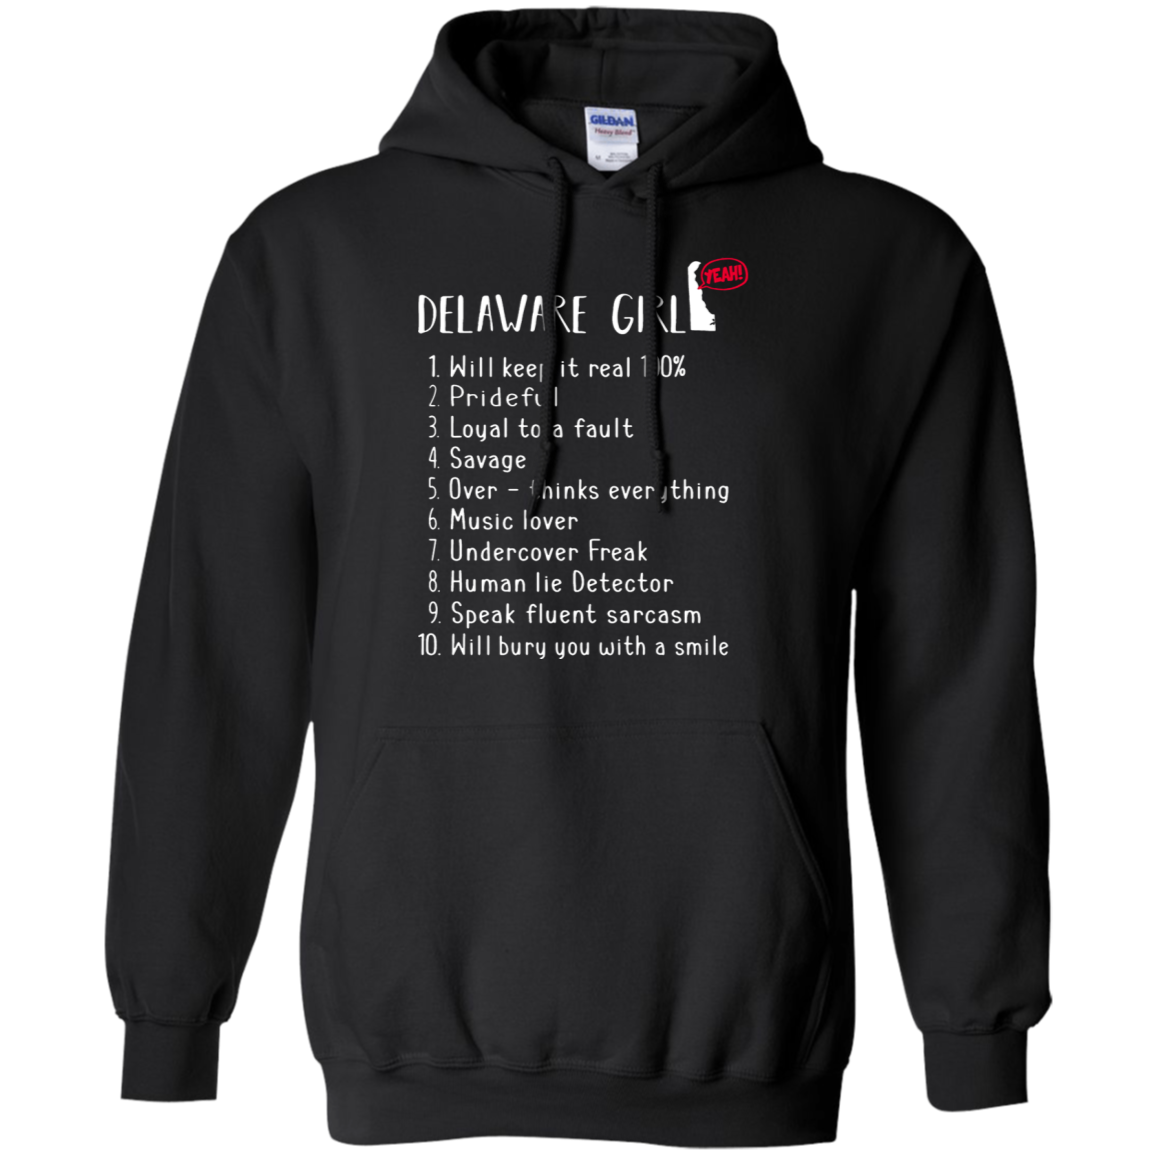 Delaware Girl Will Keep It Real What She Can Do Shirts